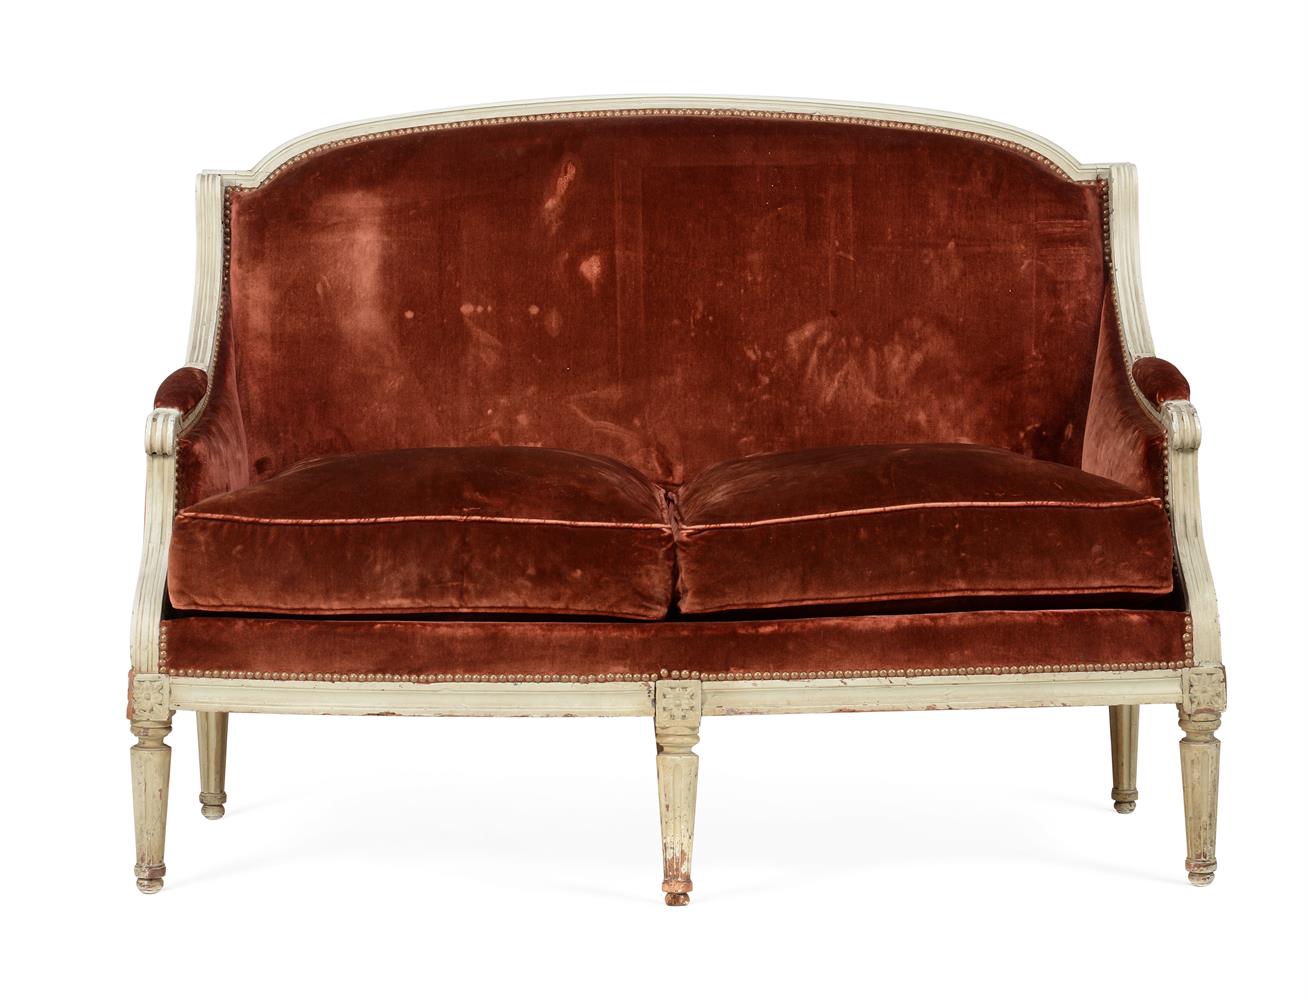 A LOUIS XVI PAINTED BEECH WOOD AND VELVET UPHOLSTERED CANAPE, LATE 18TH CENTURY